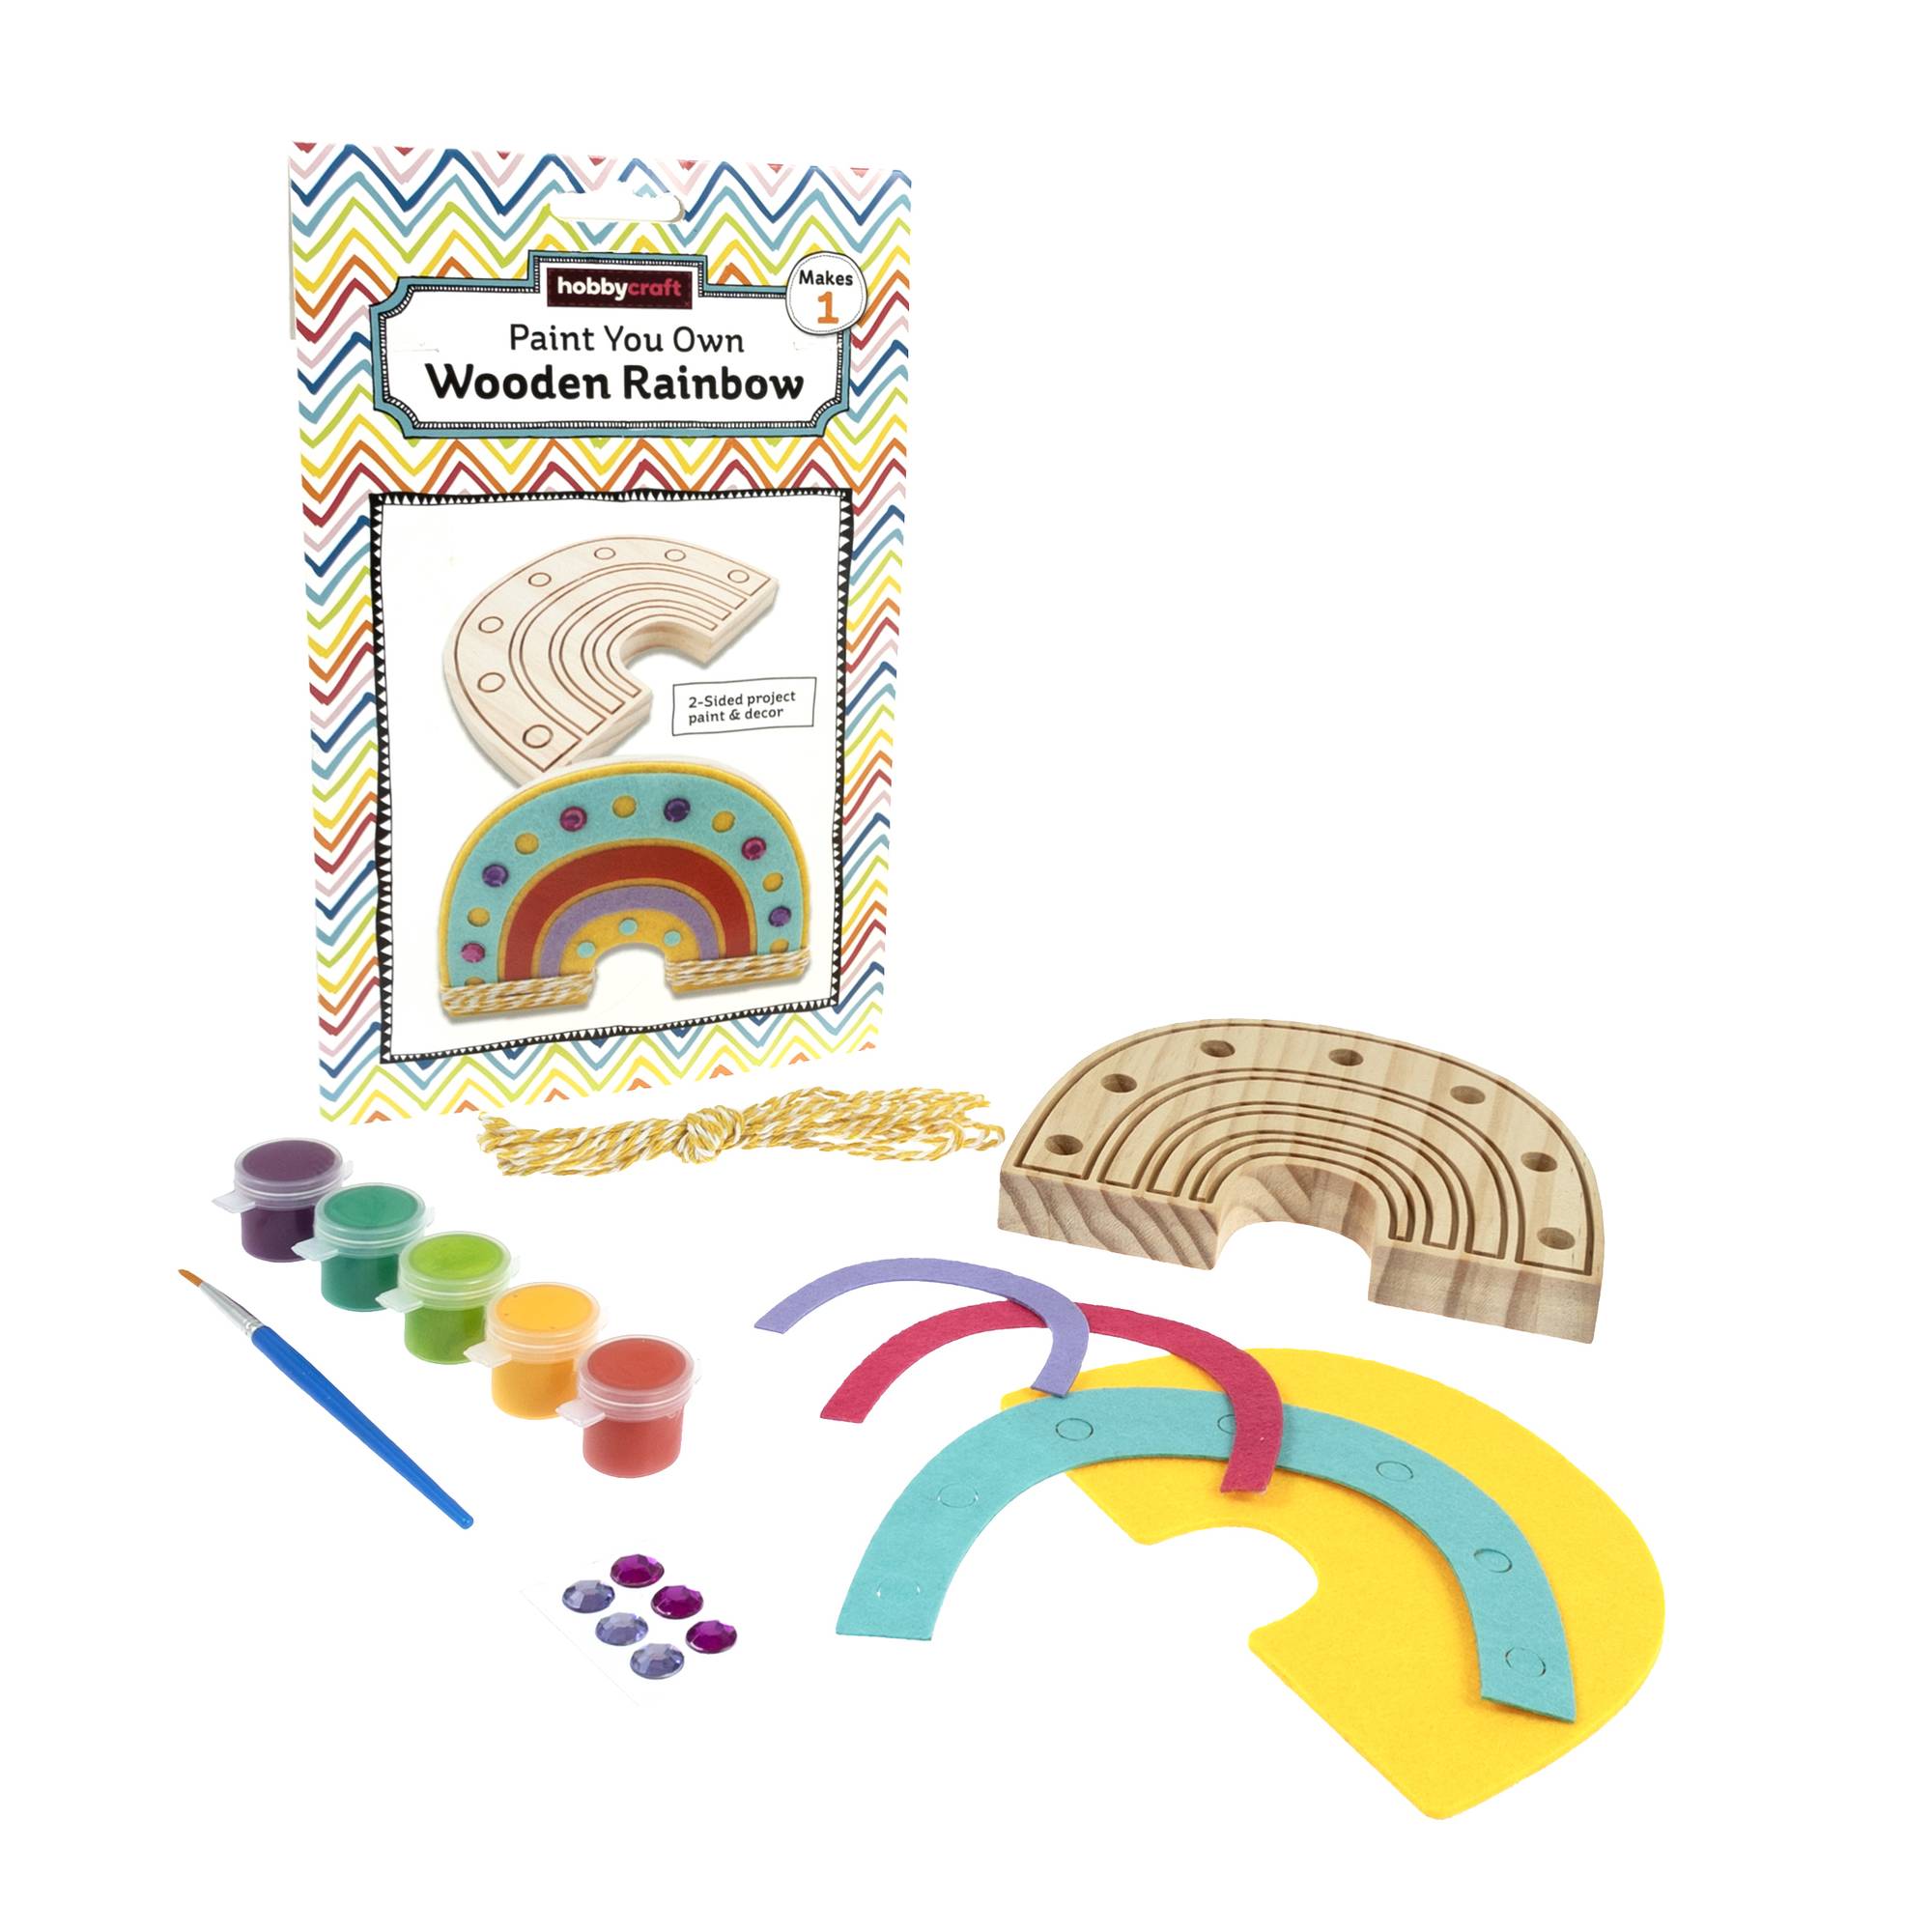 Paint Your Own Wooden Rainbow